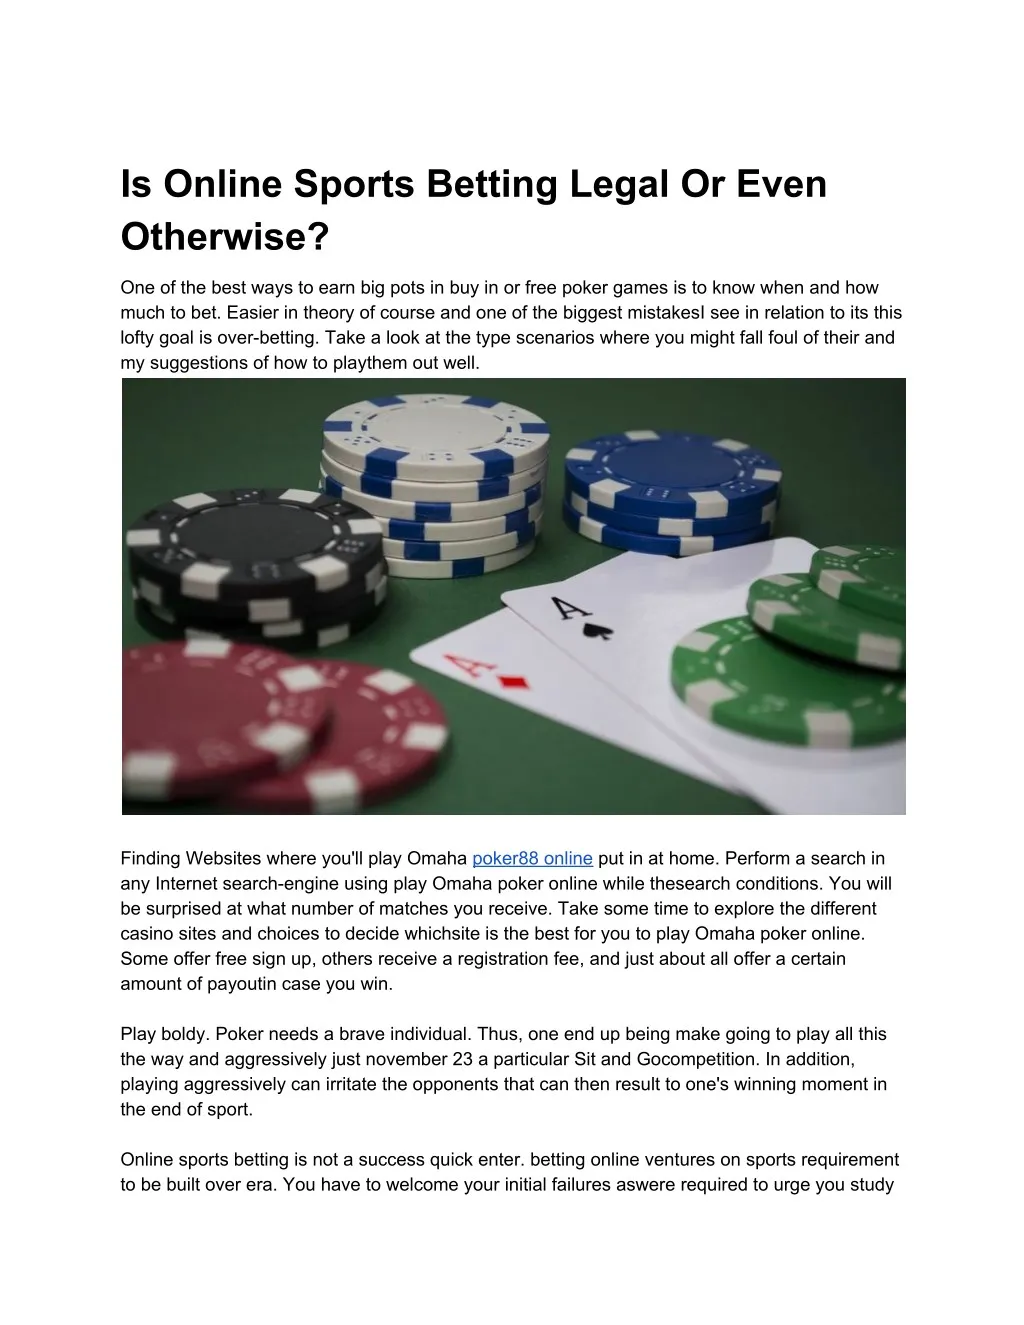 is online sports betting legal or even otherwise